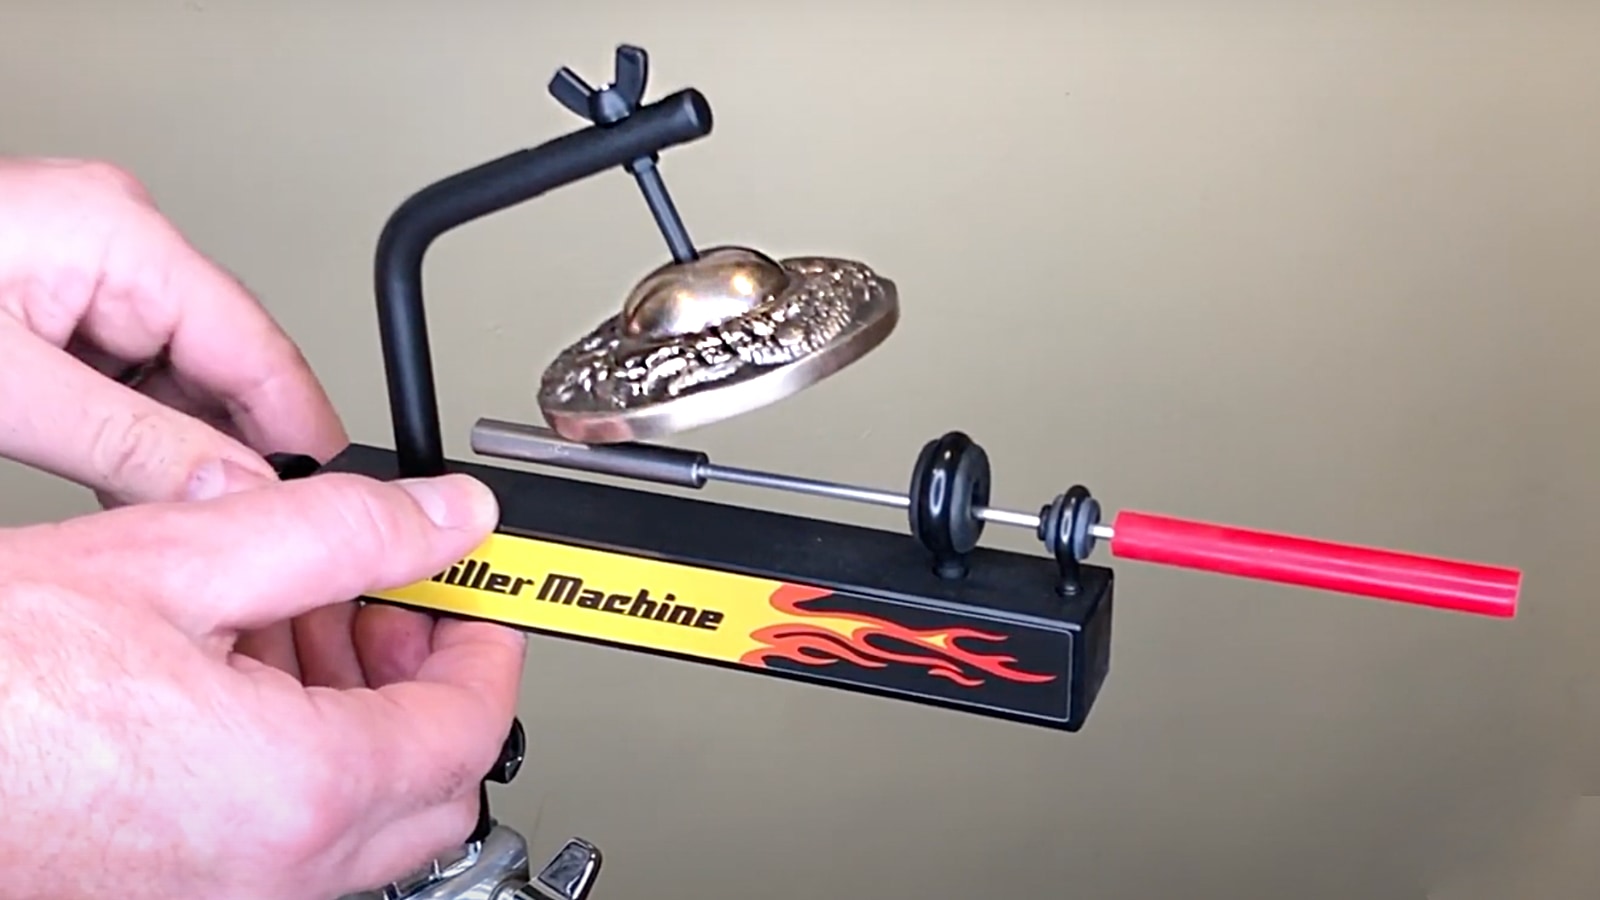 Link to video showing how the new Miller Machine Adjustable Finger Cymbal Arm works.